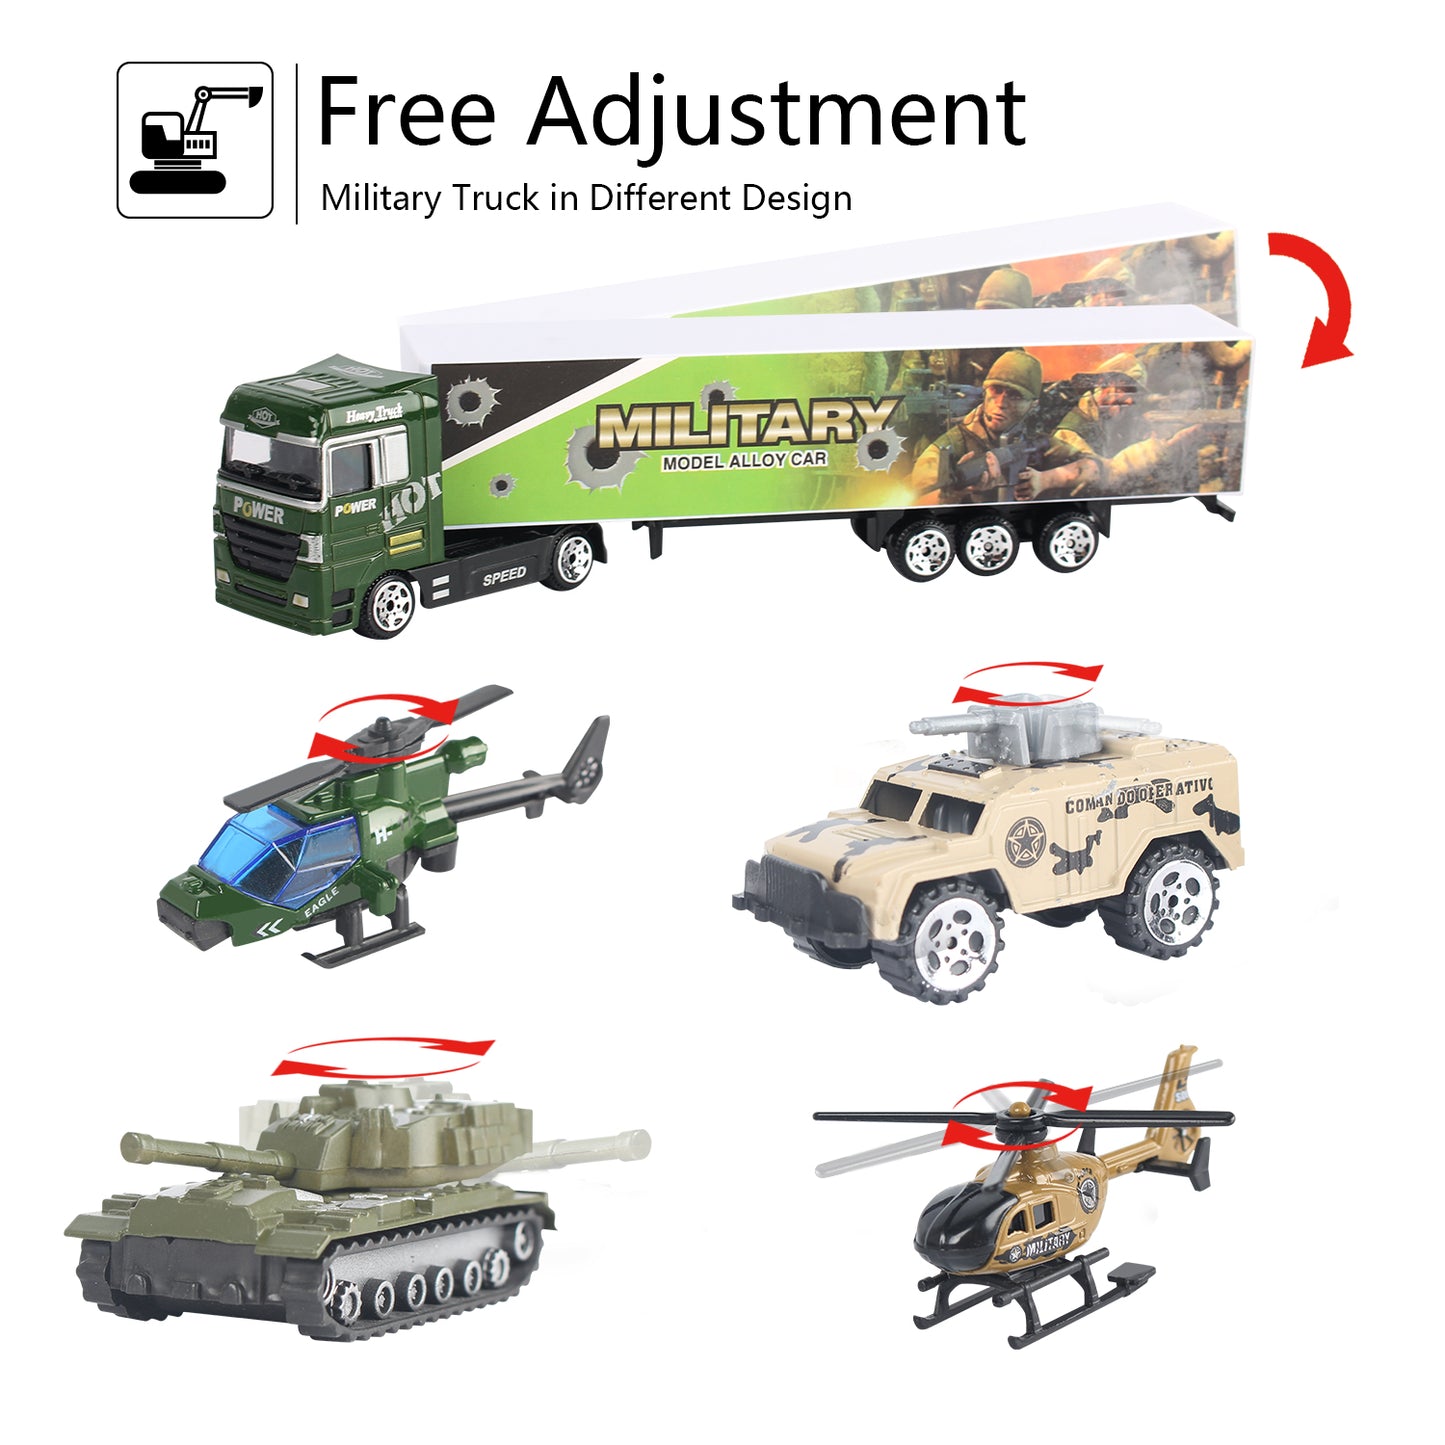 Joyfia 10 in 1 Die-cast Military Vehicle Toy, Army Transport Car Carrier Toy for Boys & Kids, Truck Toy with Mini Battle Cars Playsets, Gift for 3+ Years Old Toddlers, Party Supplies